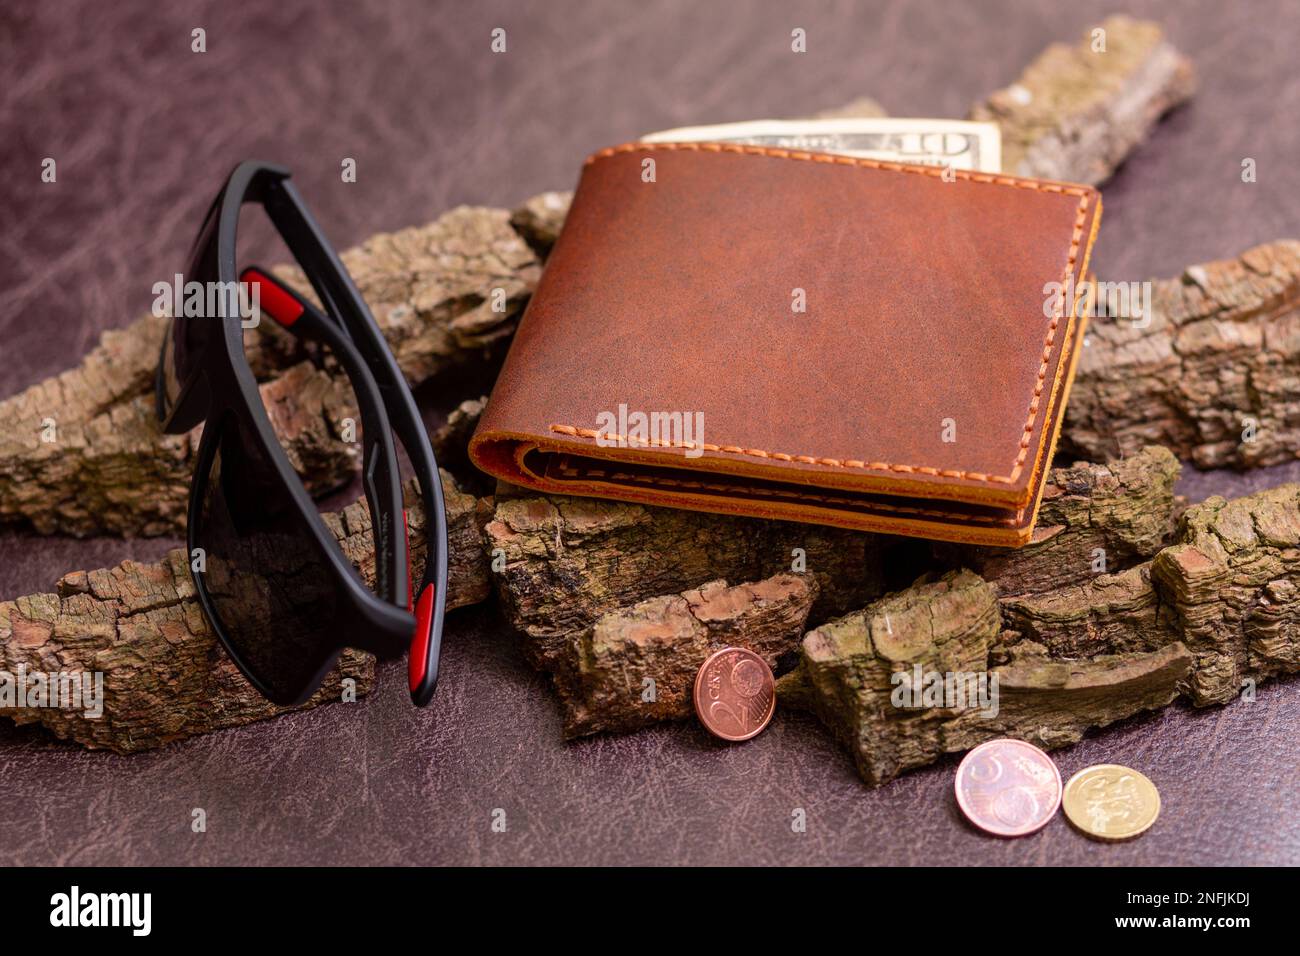 Open brown mens wallet with money and credit cards on leather background with pine bark. Stock Photo